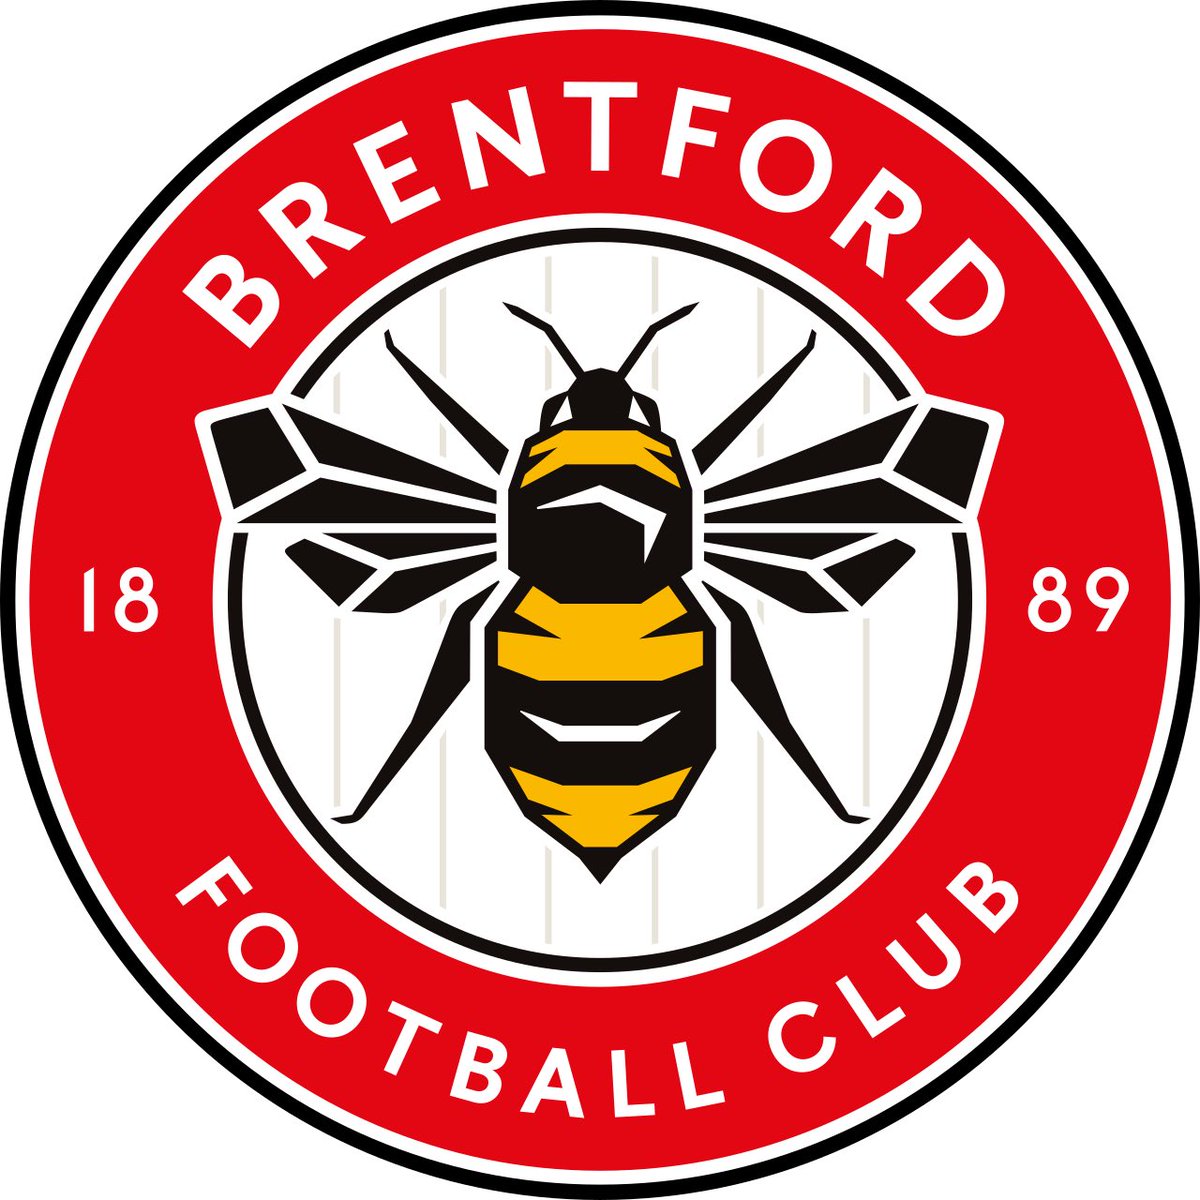 Brentford (A) now on sale to ST holders with 115+ Loyalty Points. 101 away supporters tickets remaining. The next points drop will be on Monday at 2pm (subject to availability). #Newcastle #Brentford #NUFC #BFC